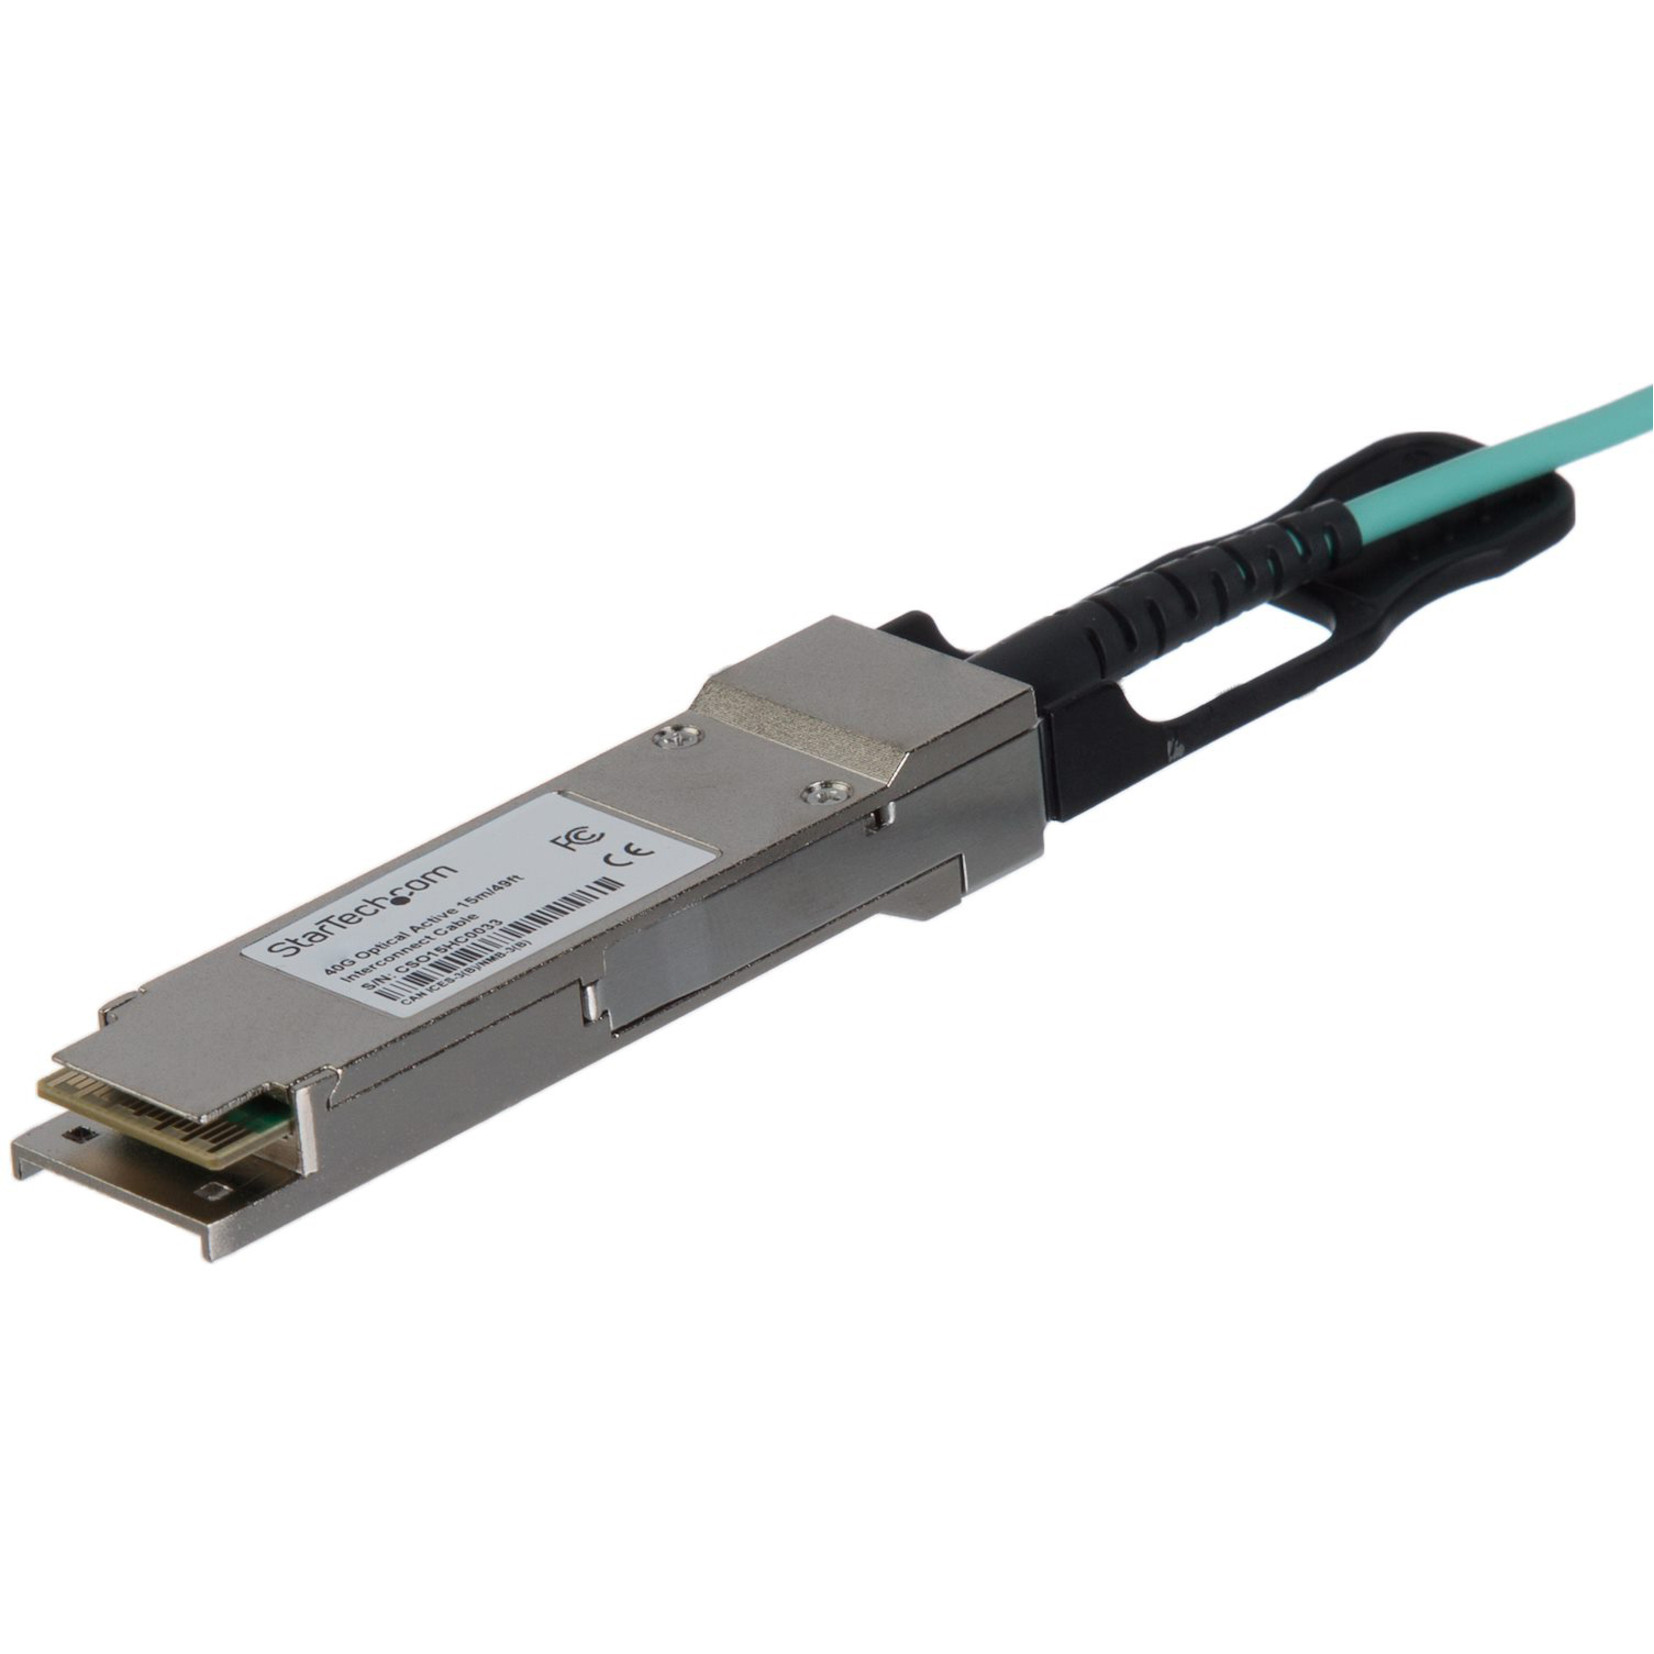 Startech .com MSA Uncoded 30m 40G QSFP+ to SFP AOC Cable40 GbE QSFP+ Active Optical Fiber40 Gbps QSFP Plus Cable 98.4’100% MSA Unco… QSFP40GAO30M